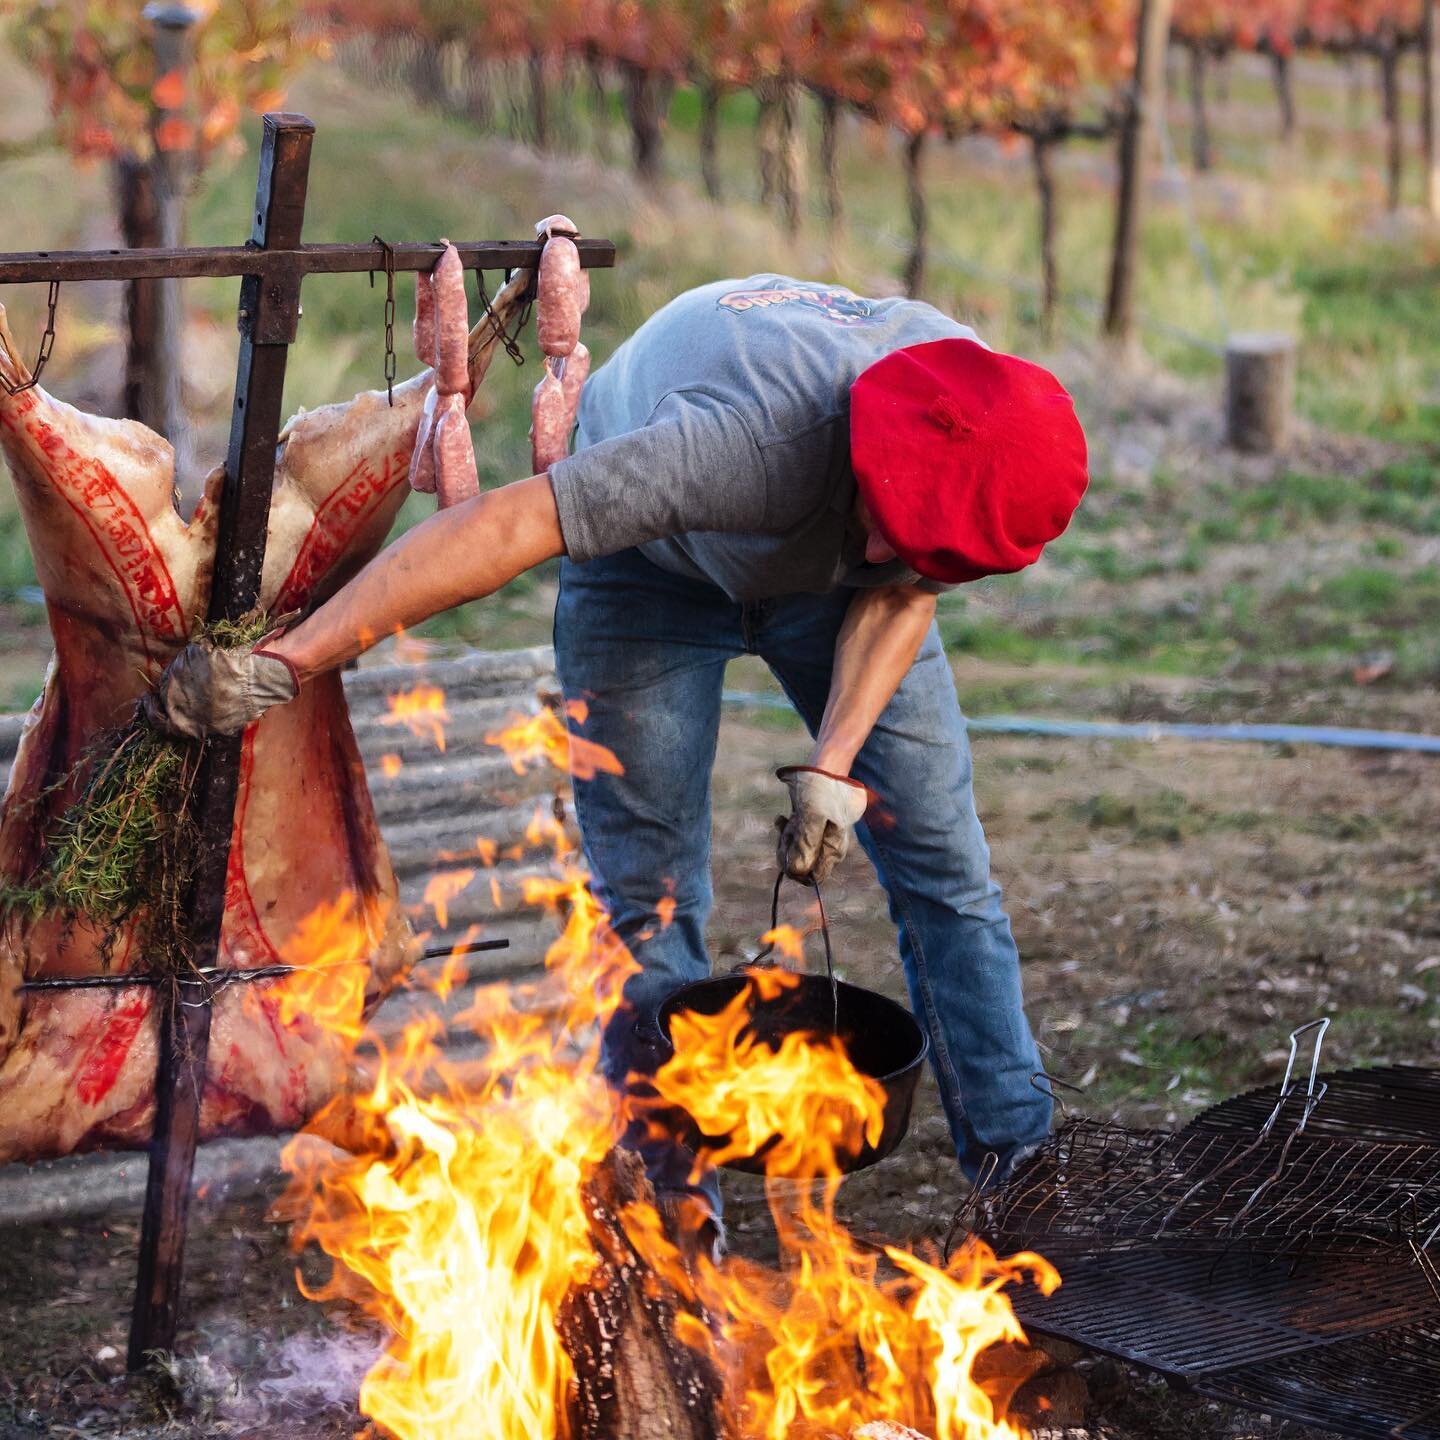 A night to warm your bones and your soul!🔥🍷

We&rsquo;re very excited to announce that we are partnering with the one and only @charlotte_dalton_wines for a Winter Asado @thejoinerywineroom on the 18th June🔥

Join us for lamb, beef ribs and choriz